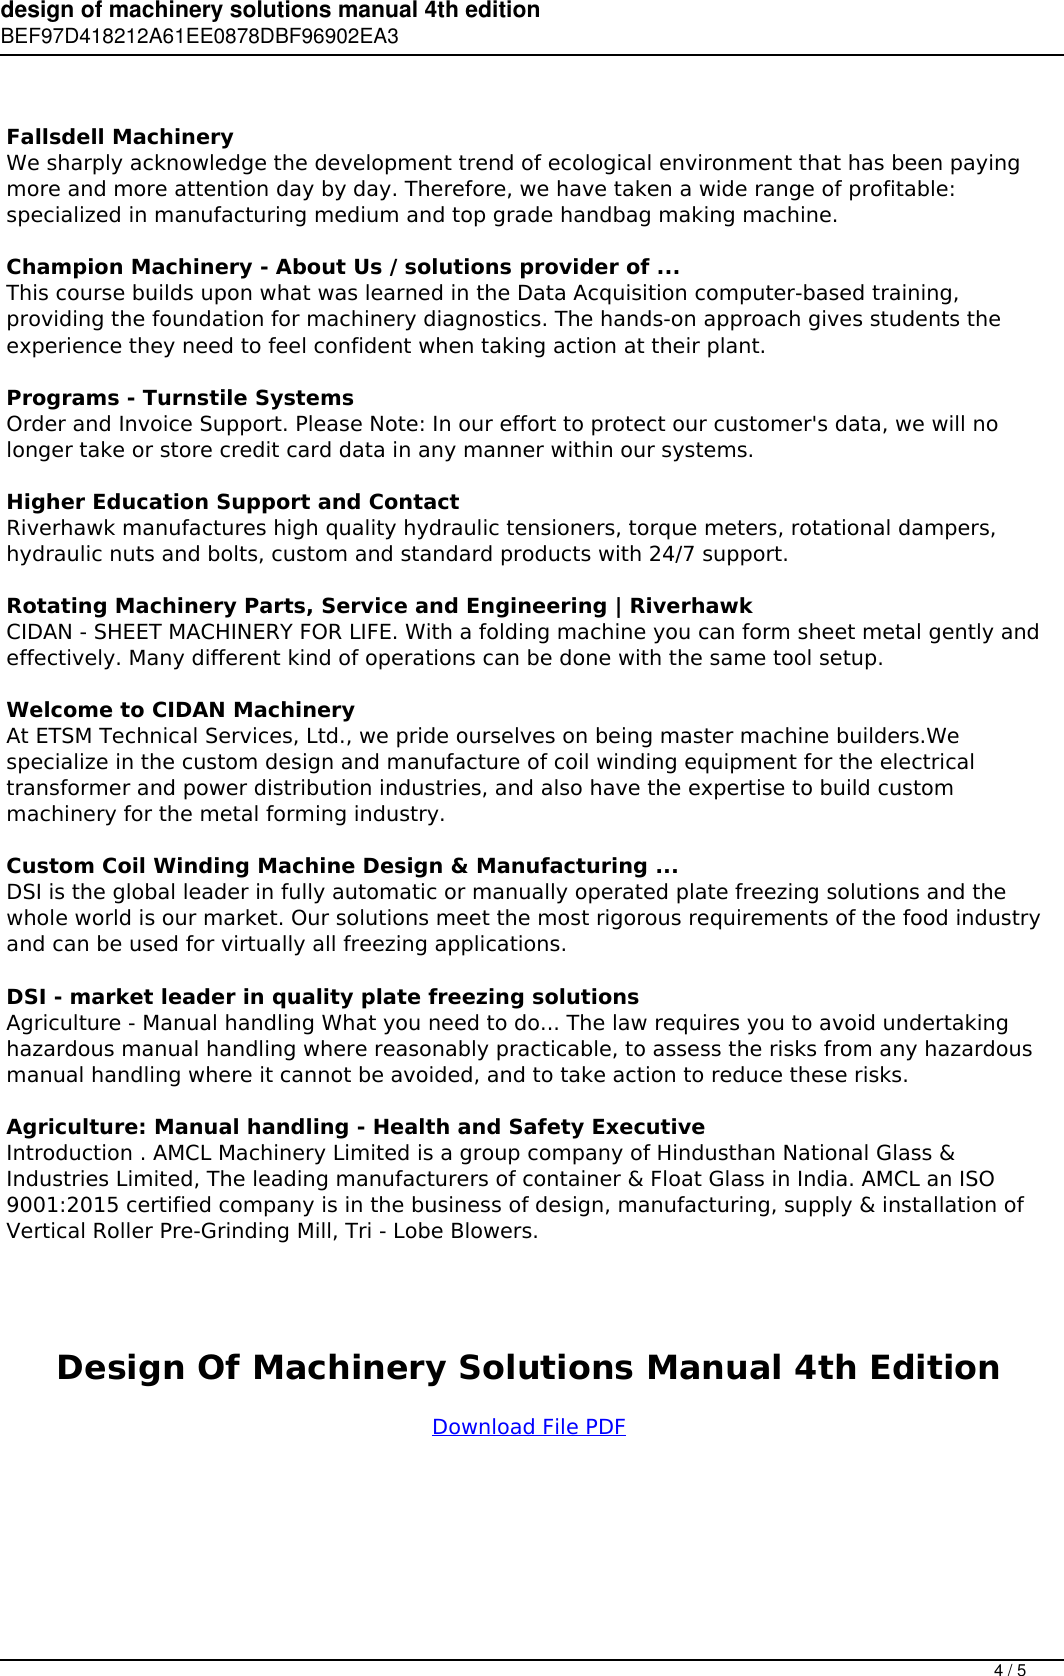 Designofmachinerysolutionsmanual4thedition.761680926 User Guide Page 4 